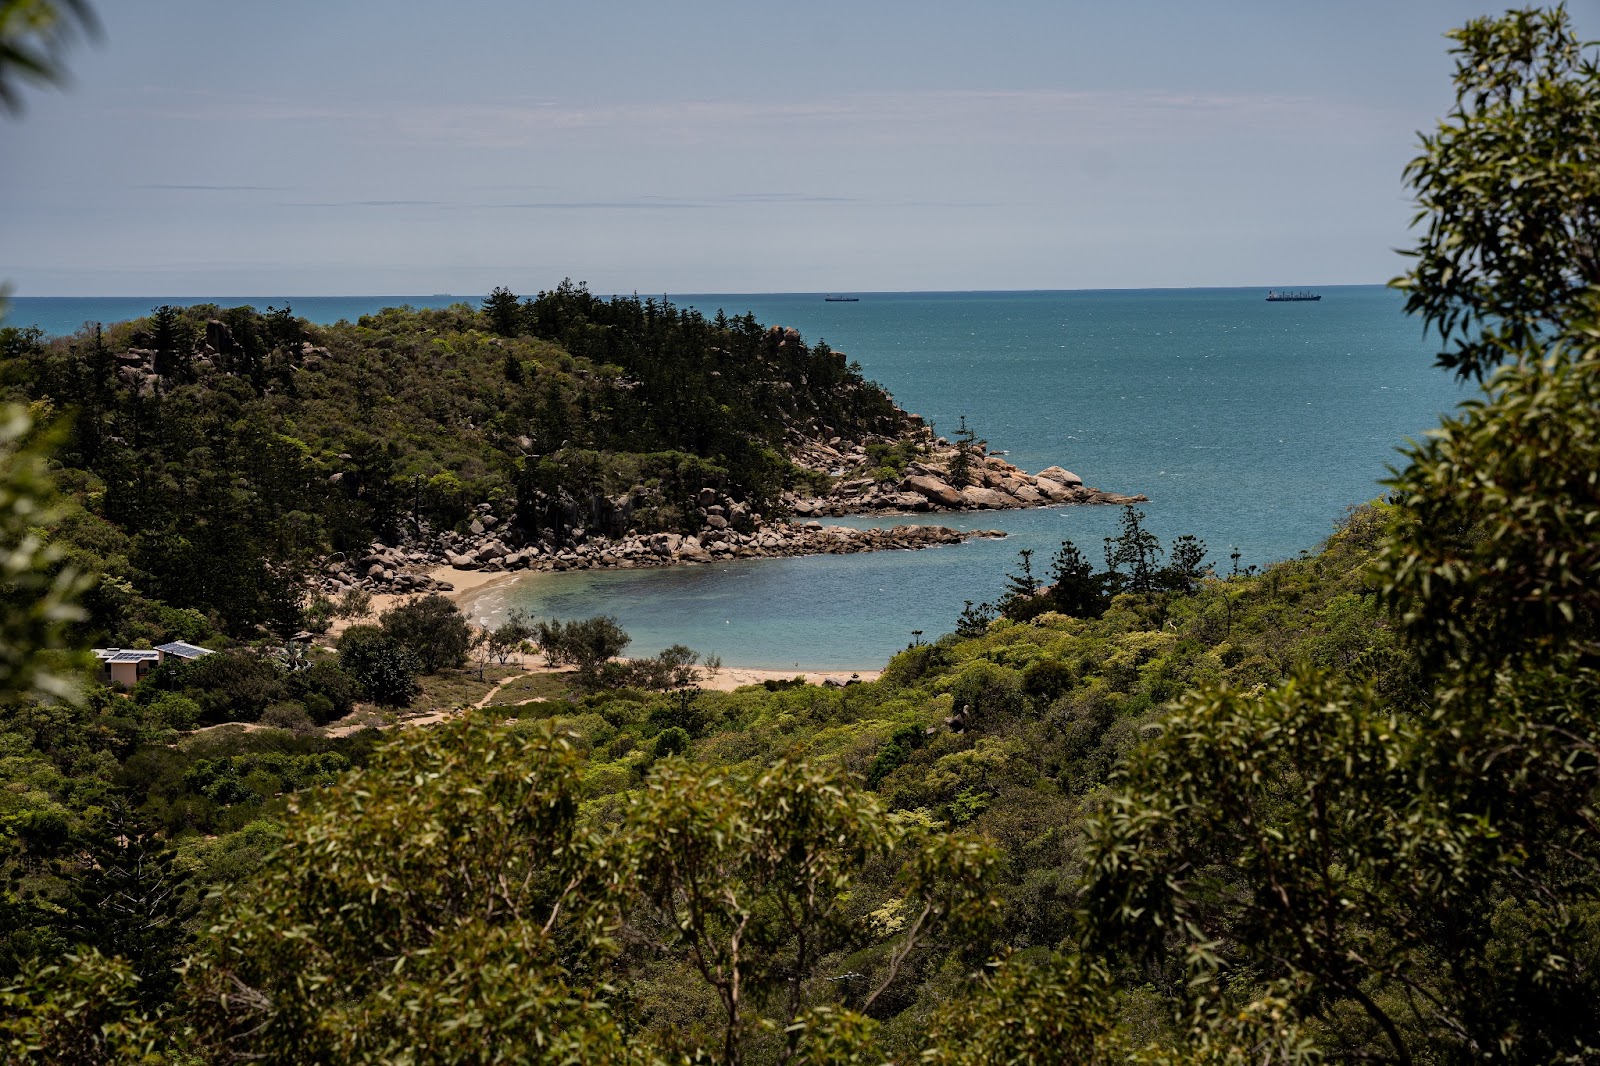 A serene beach on Magnetic Island with turquoise waters and lush greenery.